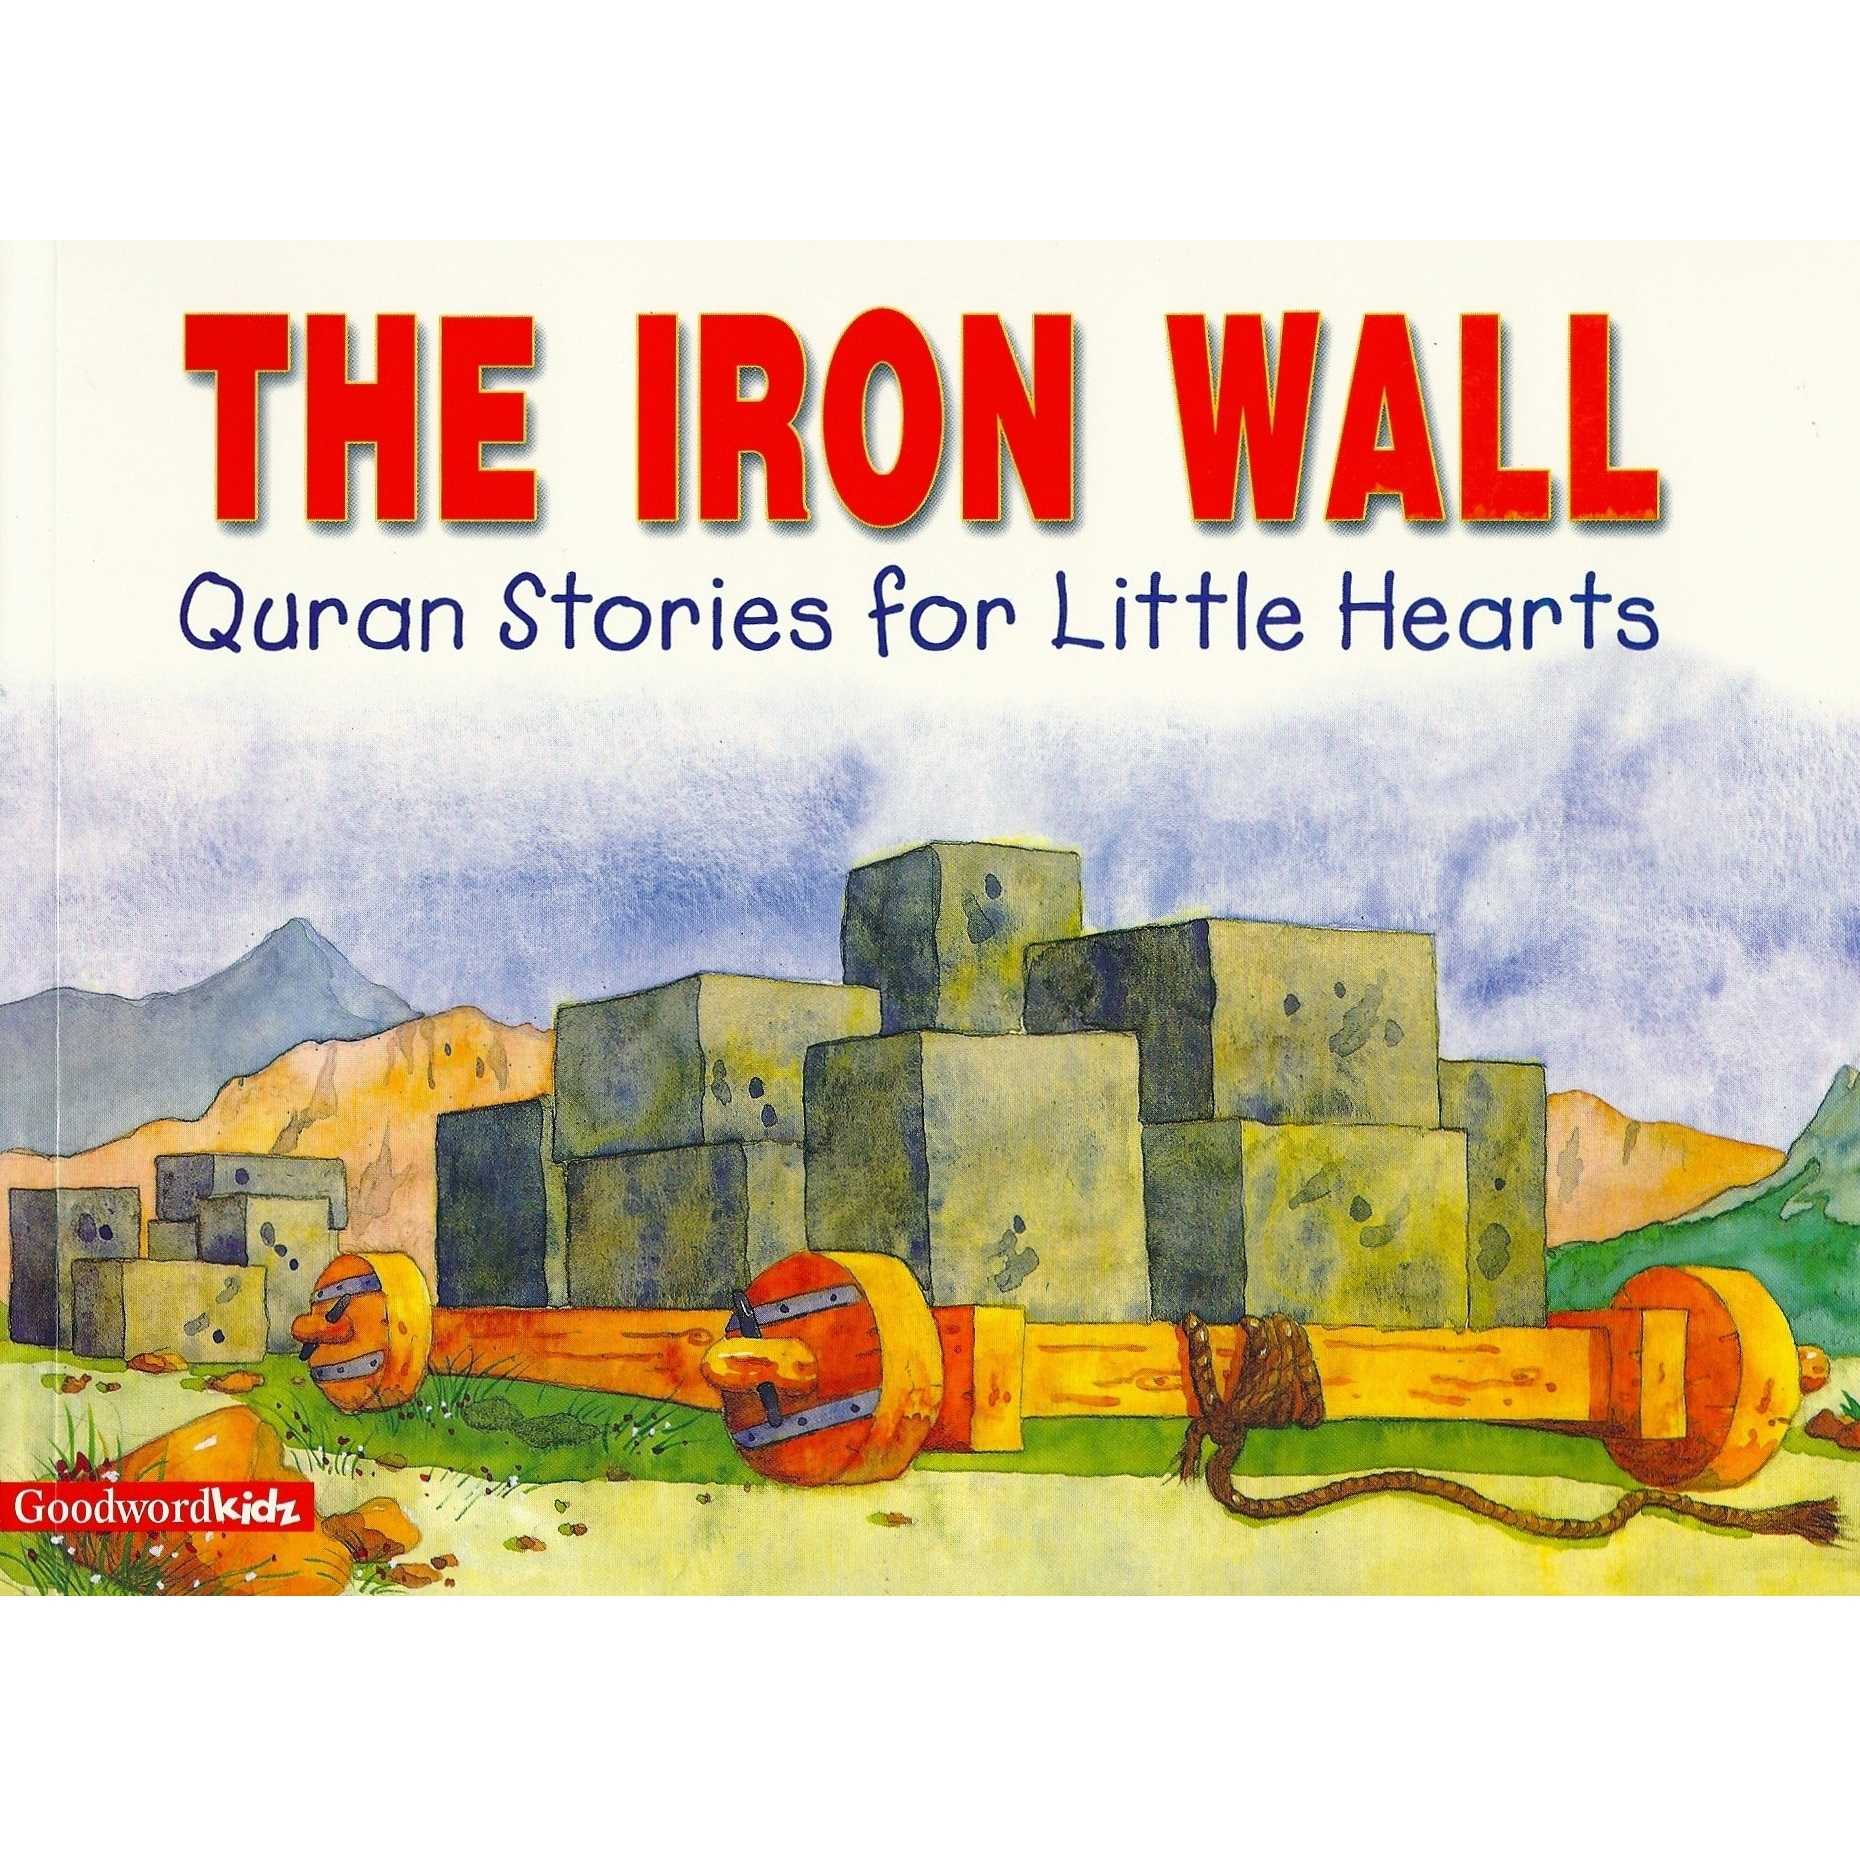 The Iron Wall By Saniyasnain Khan [Quran Stories for Little Hearts]